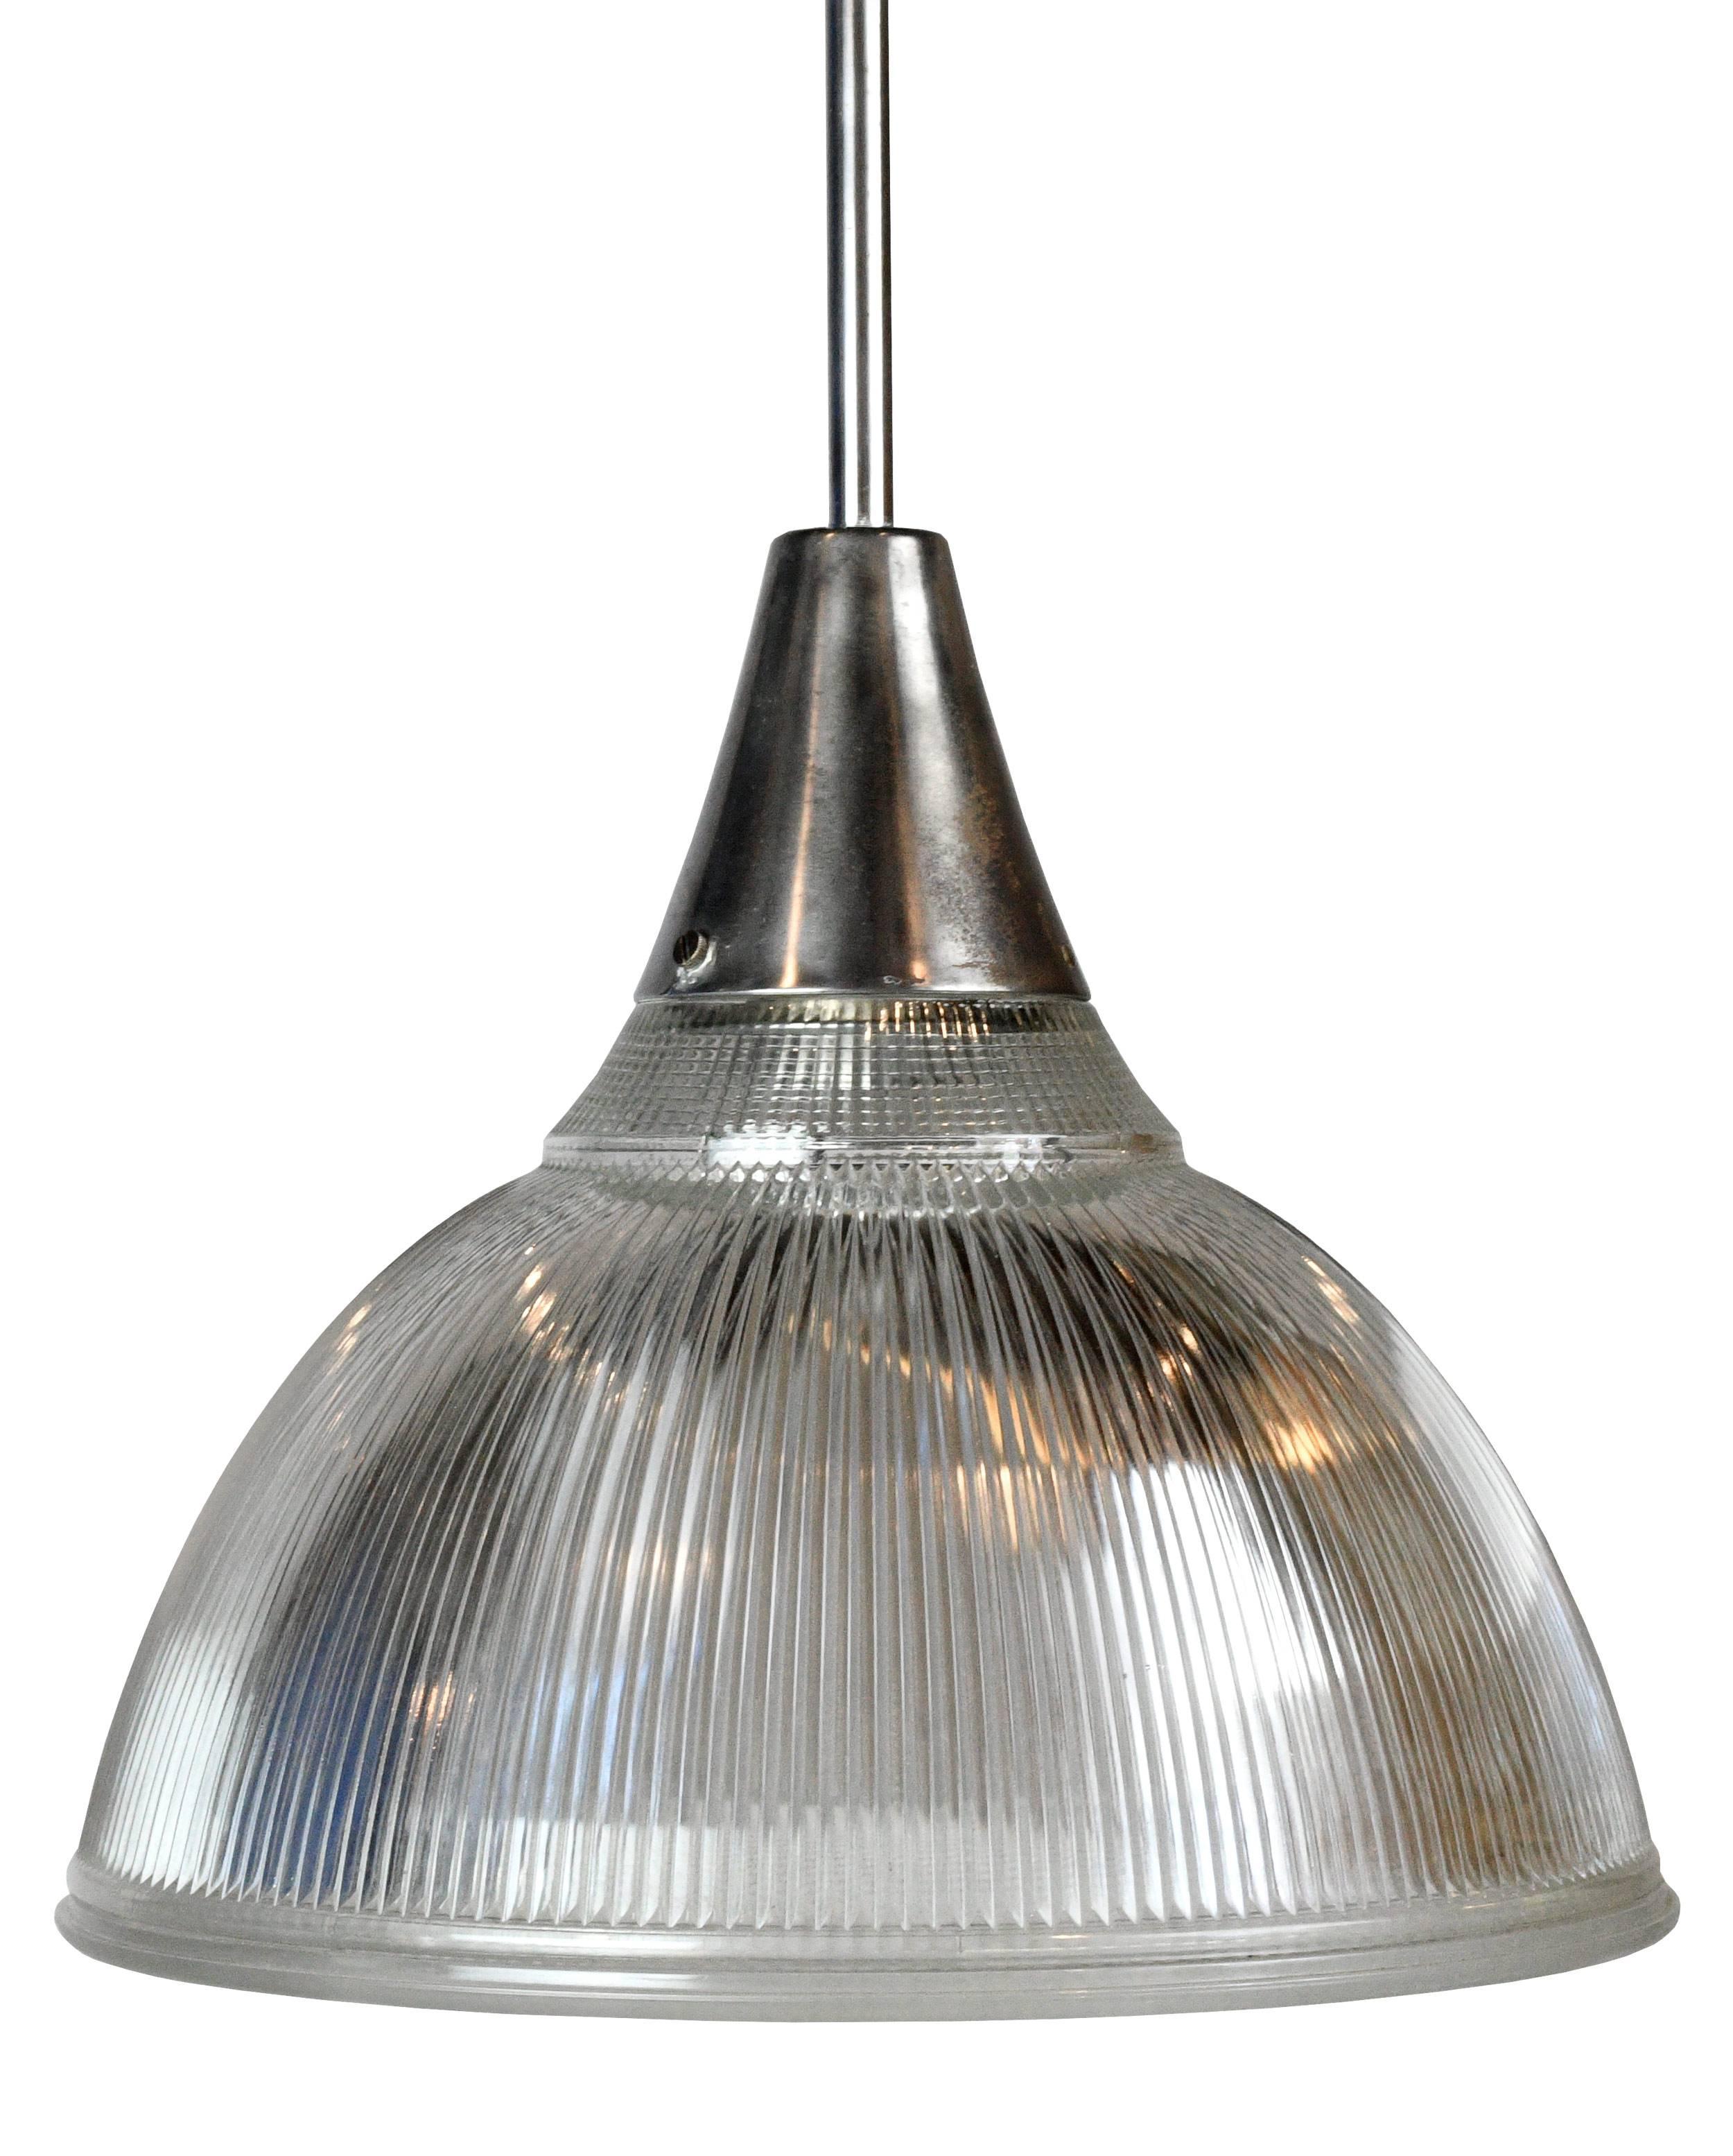 Handsome Holophane pendant with textured glass designed to diffuse light evenly throughout a space. 
We have 25 pendants available, so there are more than enough for your personal or commercial projects!

Measurements:
15.5